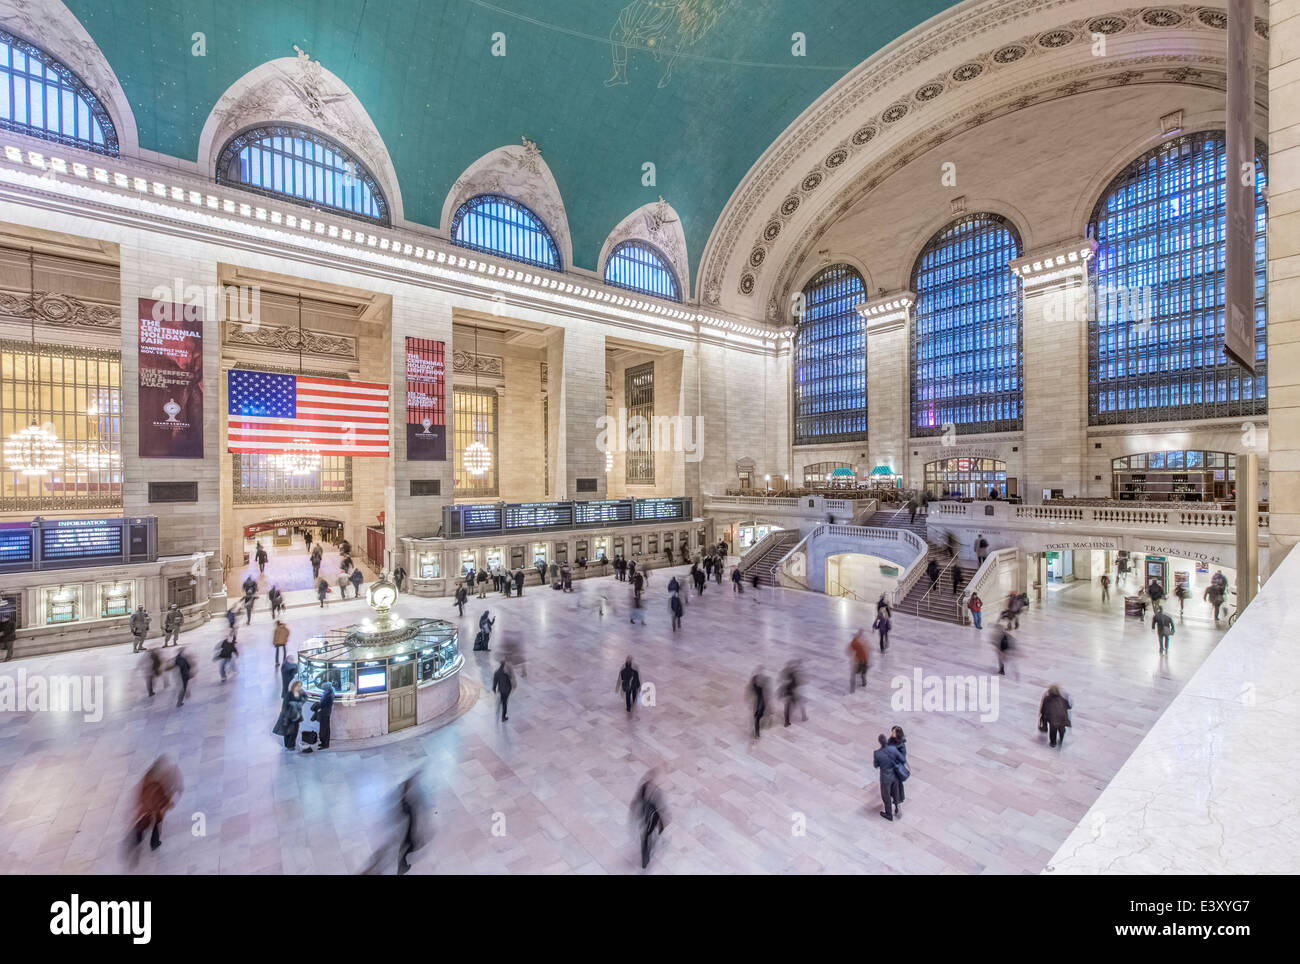 Blurred view of people in Grand Central station, New York City, New York, United States Stock Photo